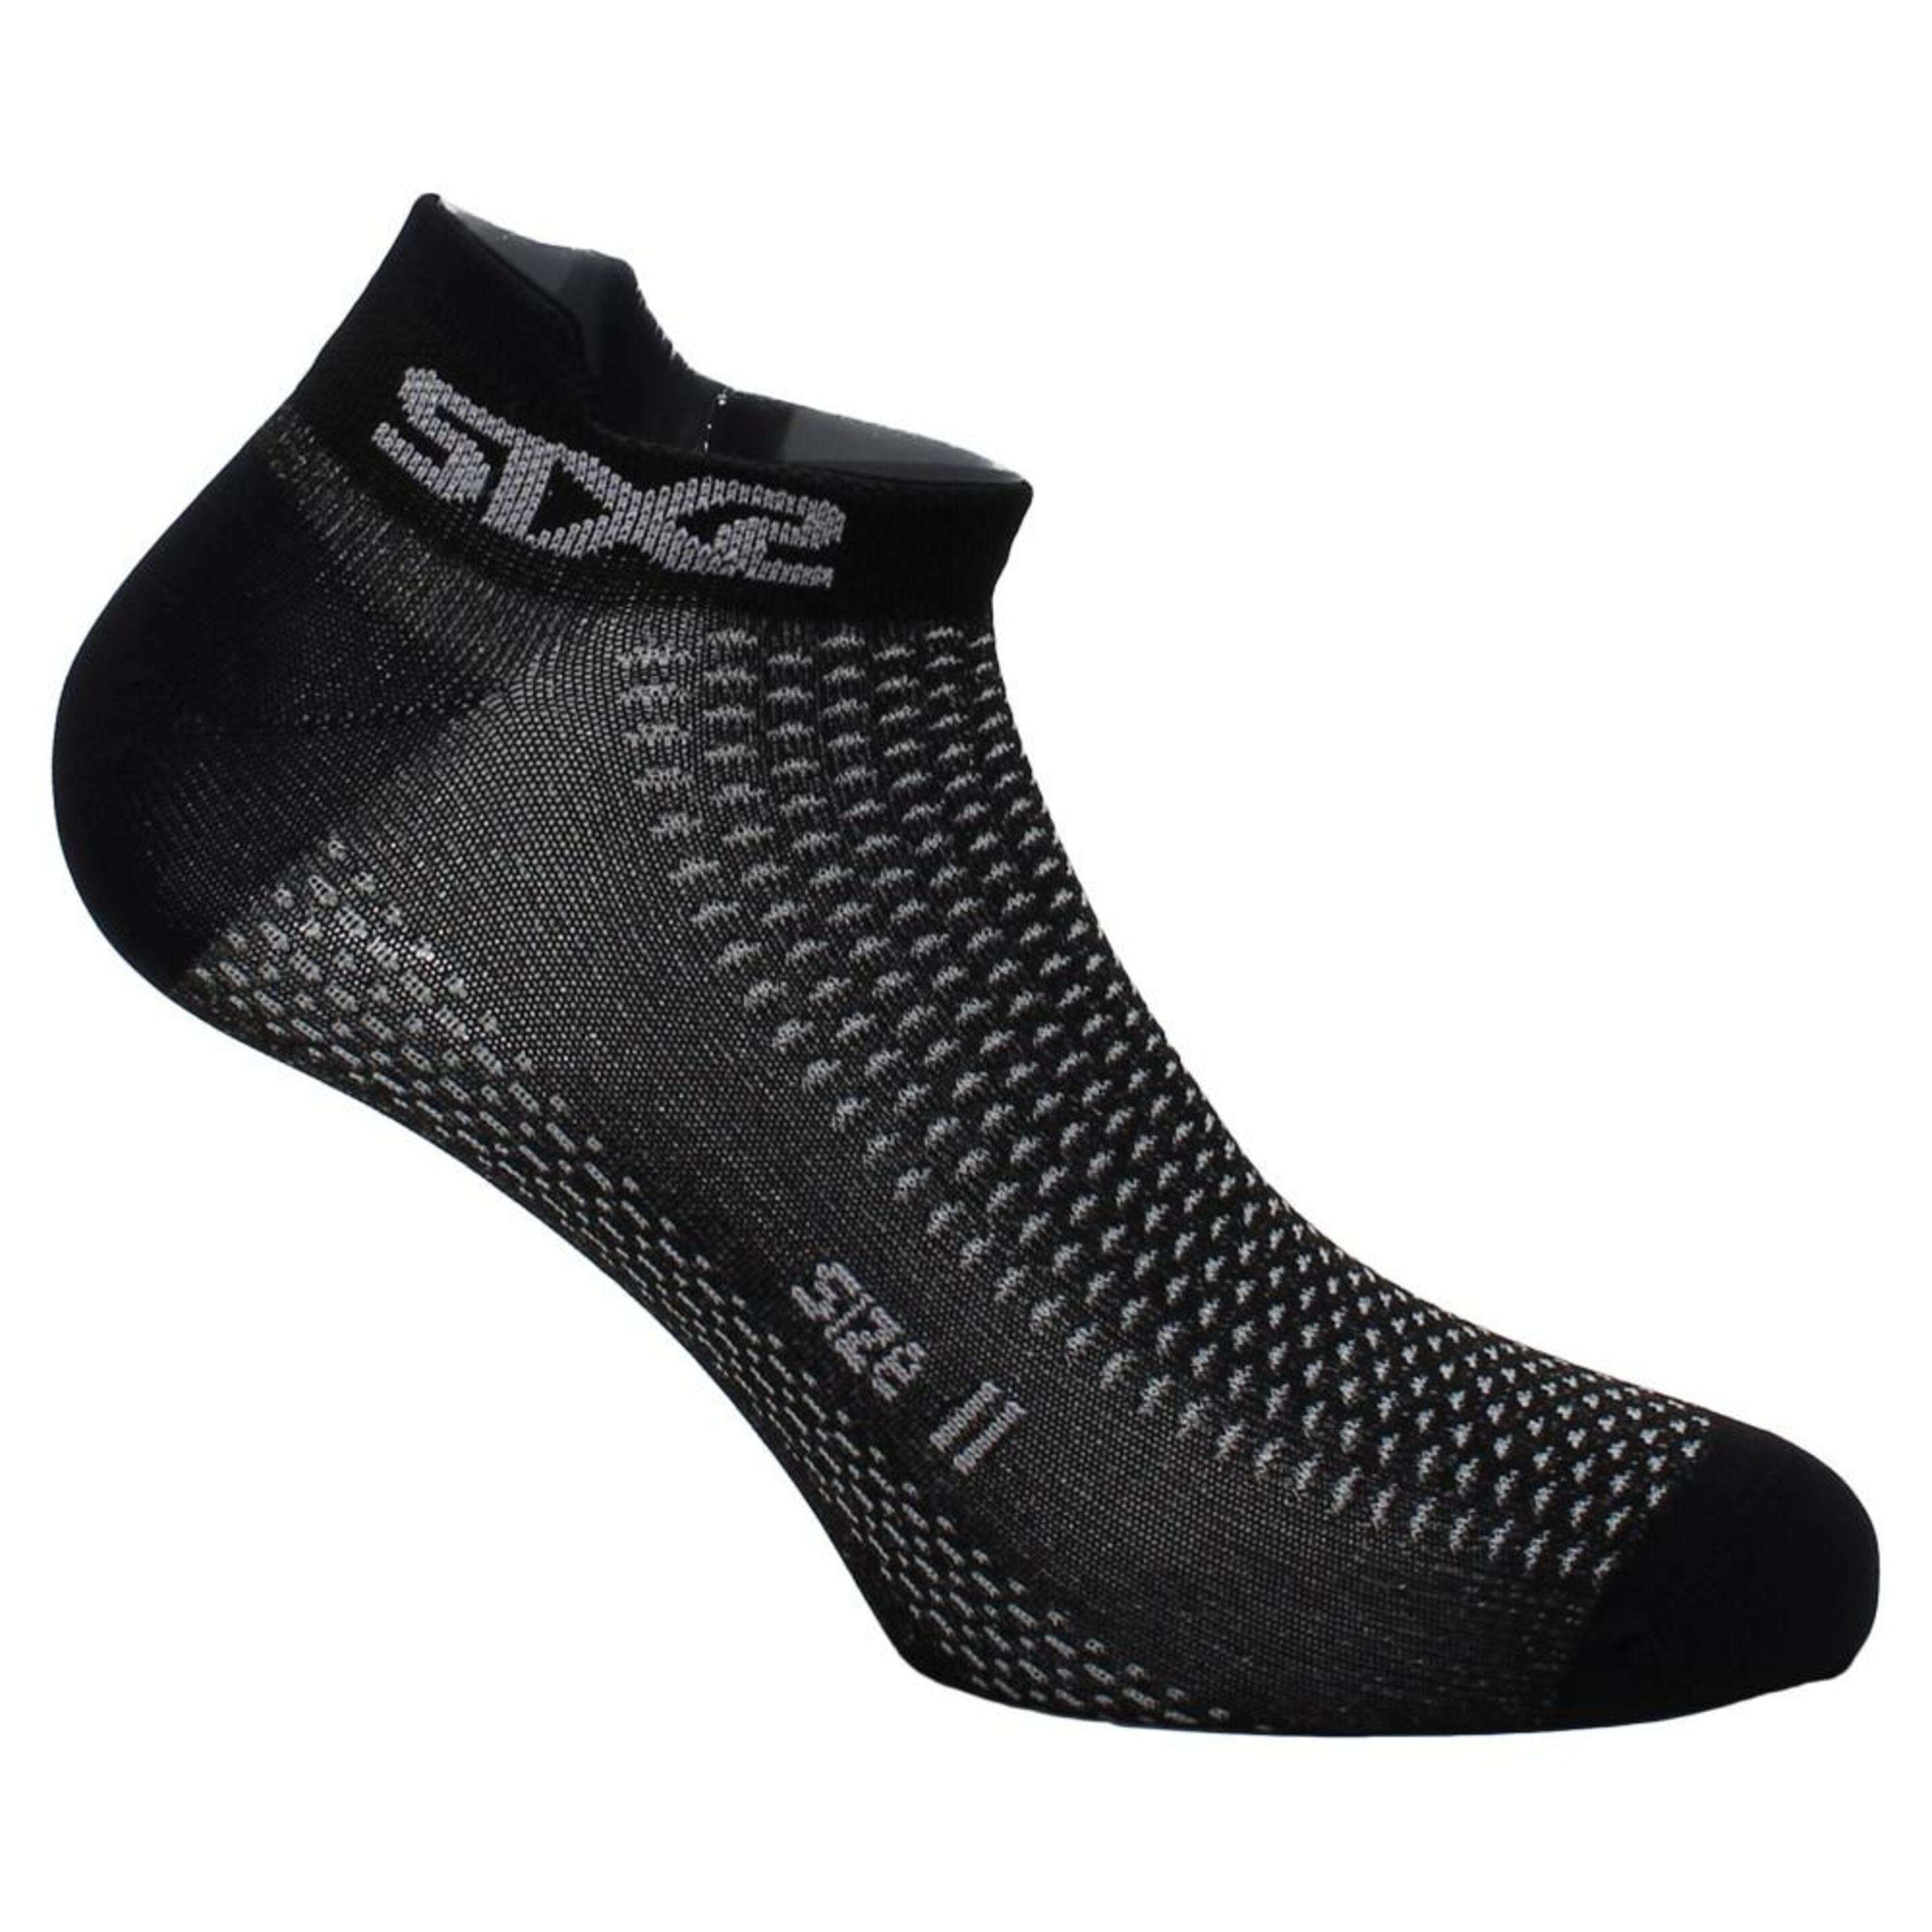 Calcetines Ciclismo Sixs Fant S - negro - 